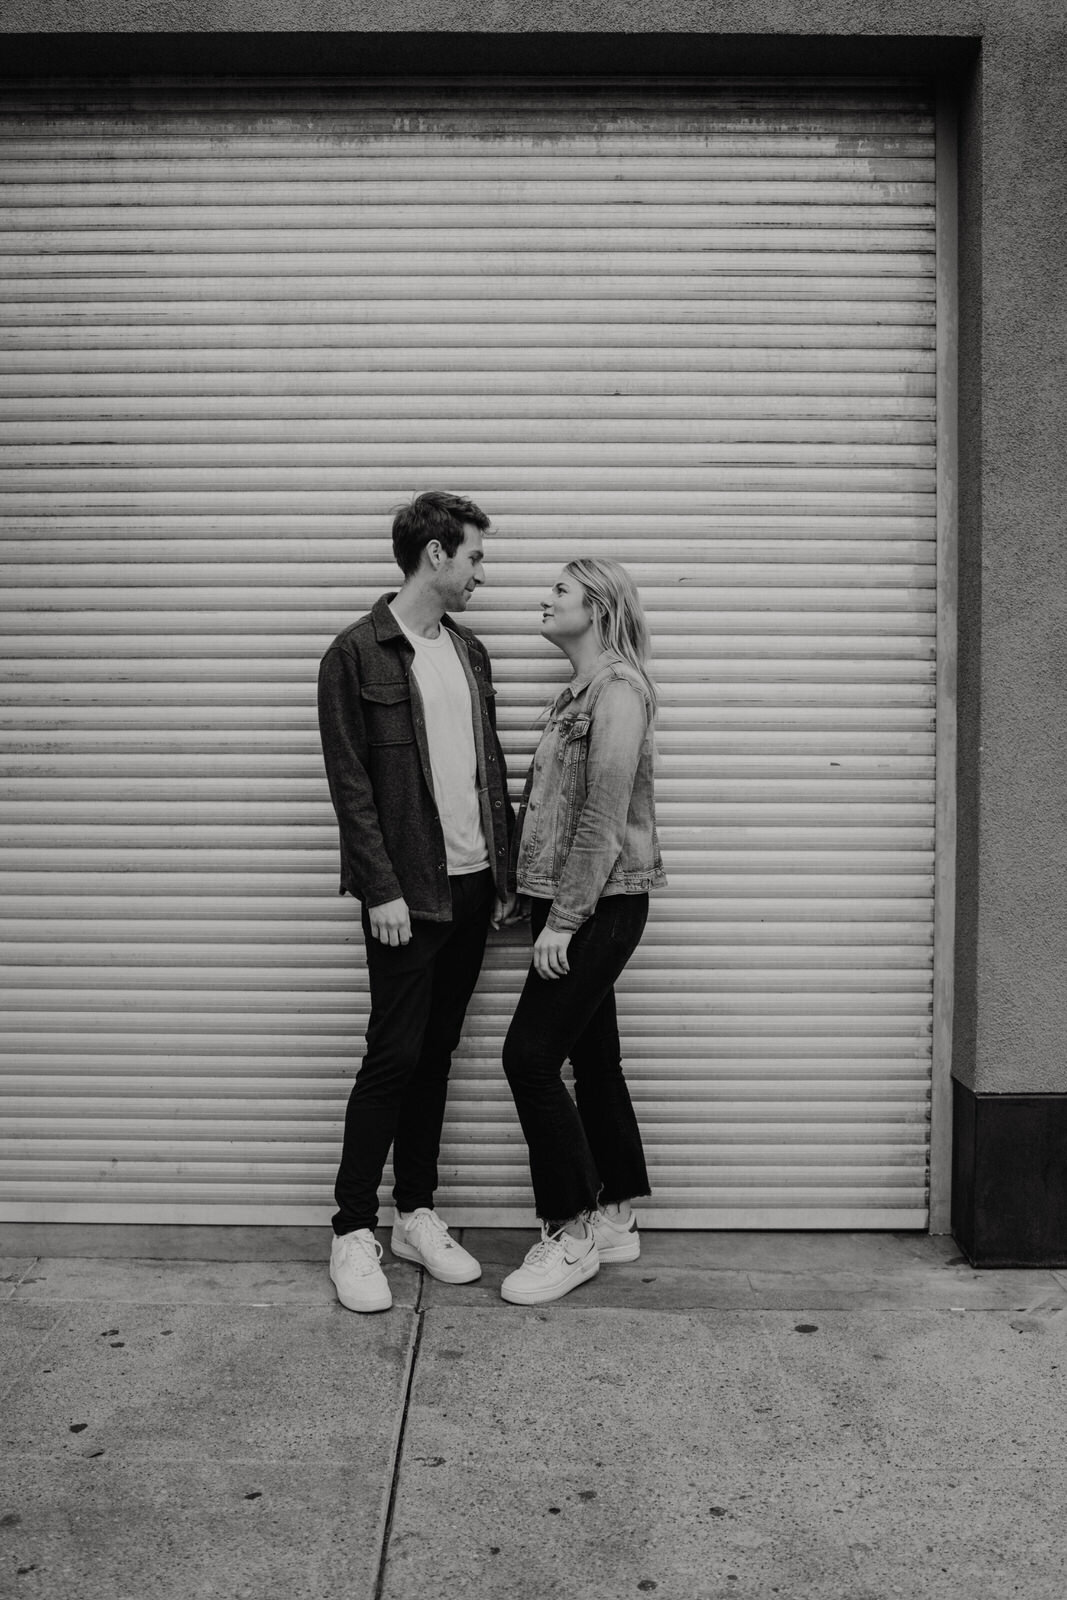 Dark and moody sunrise engagement photos in the LA Arts District | Fun, edgy, urban couples photos | Downtown LA Engagement photos | Photo by Kept Record | www.keptrecord.com